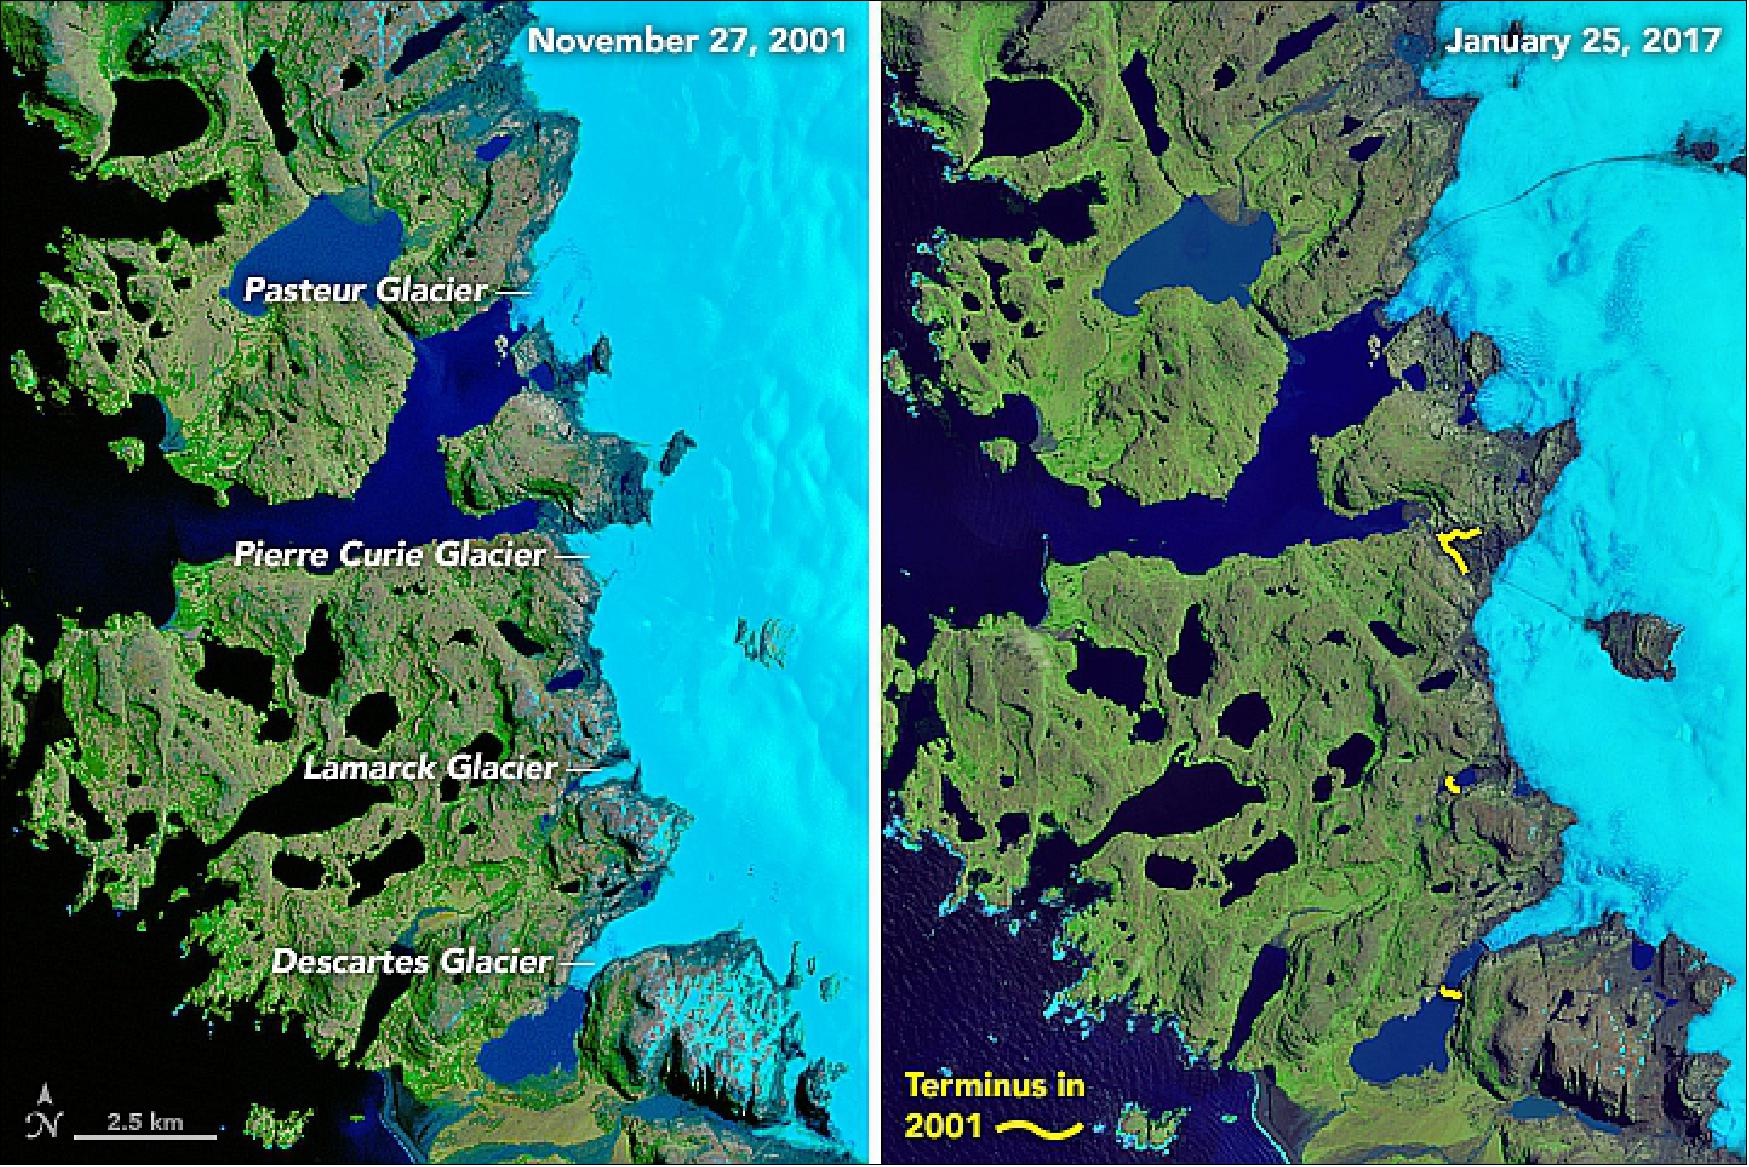 Figure 28: On January 25, 2017, OLI on Landsat-8 got a rare, clear look at the islands (right image) and the western side of the Cook Ice Cap. The left image, acquired with the Enhanced Thematic Mapper Plus (ETM+) on the Landsat-7 satellite, shows the same area on November 27, 2001. Both images are false-color (OLI bands 6-5-3 and ETM+ bands 5-4-2—shortwave infrared, near-infrared, and green light) to better show detail in the icy area (image credit: NASA Earth Observatory, images by Joshua Stevens, using Landsat data from the U.S. Geological Survey, story by Kathryn Hansen)